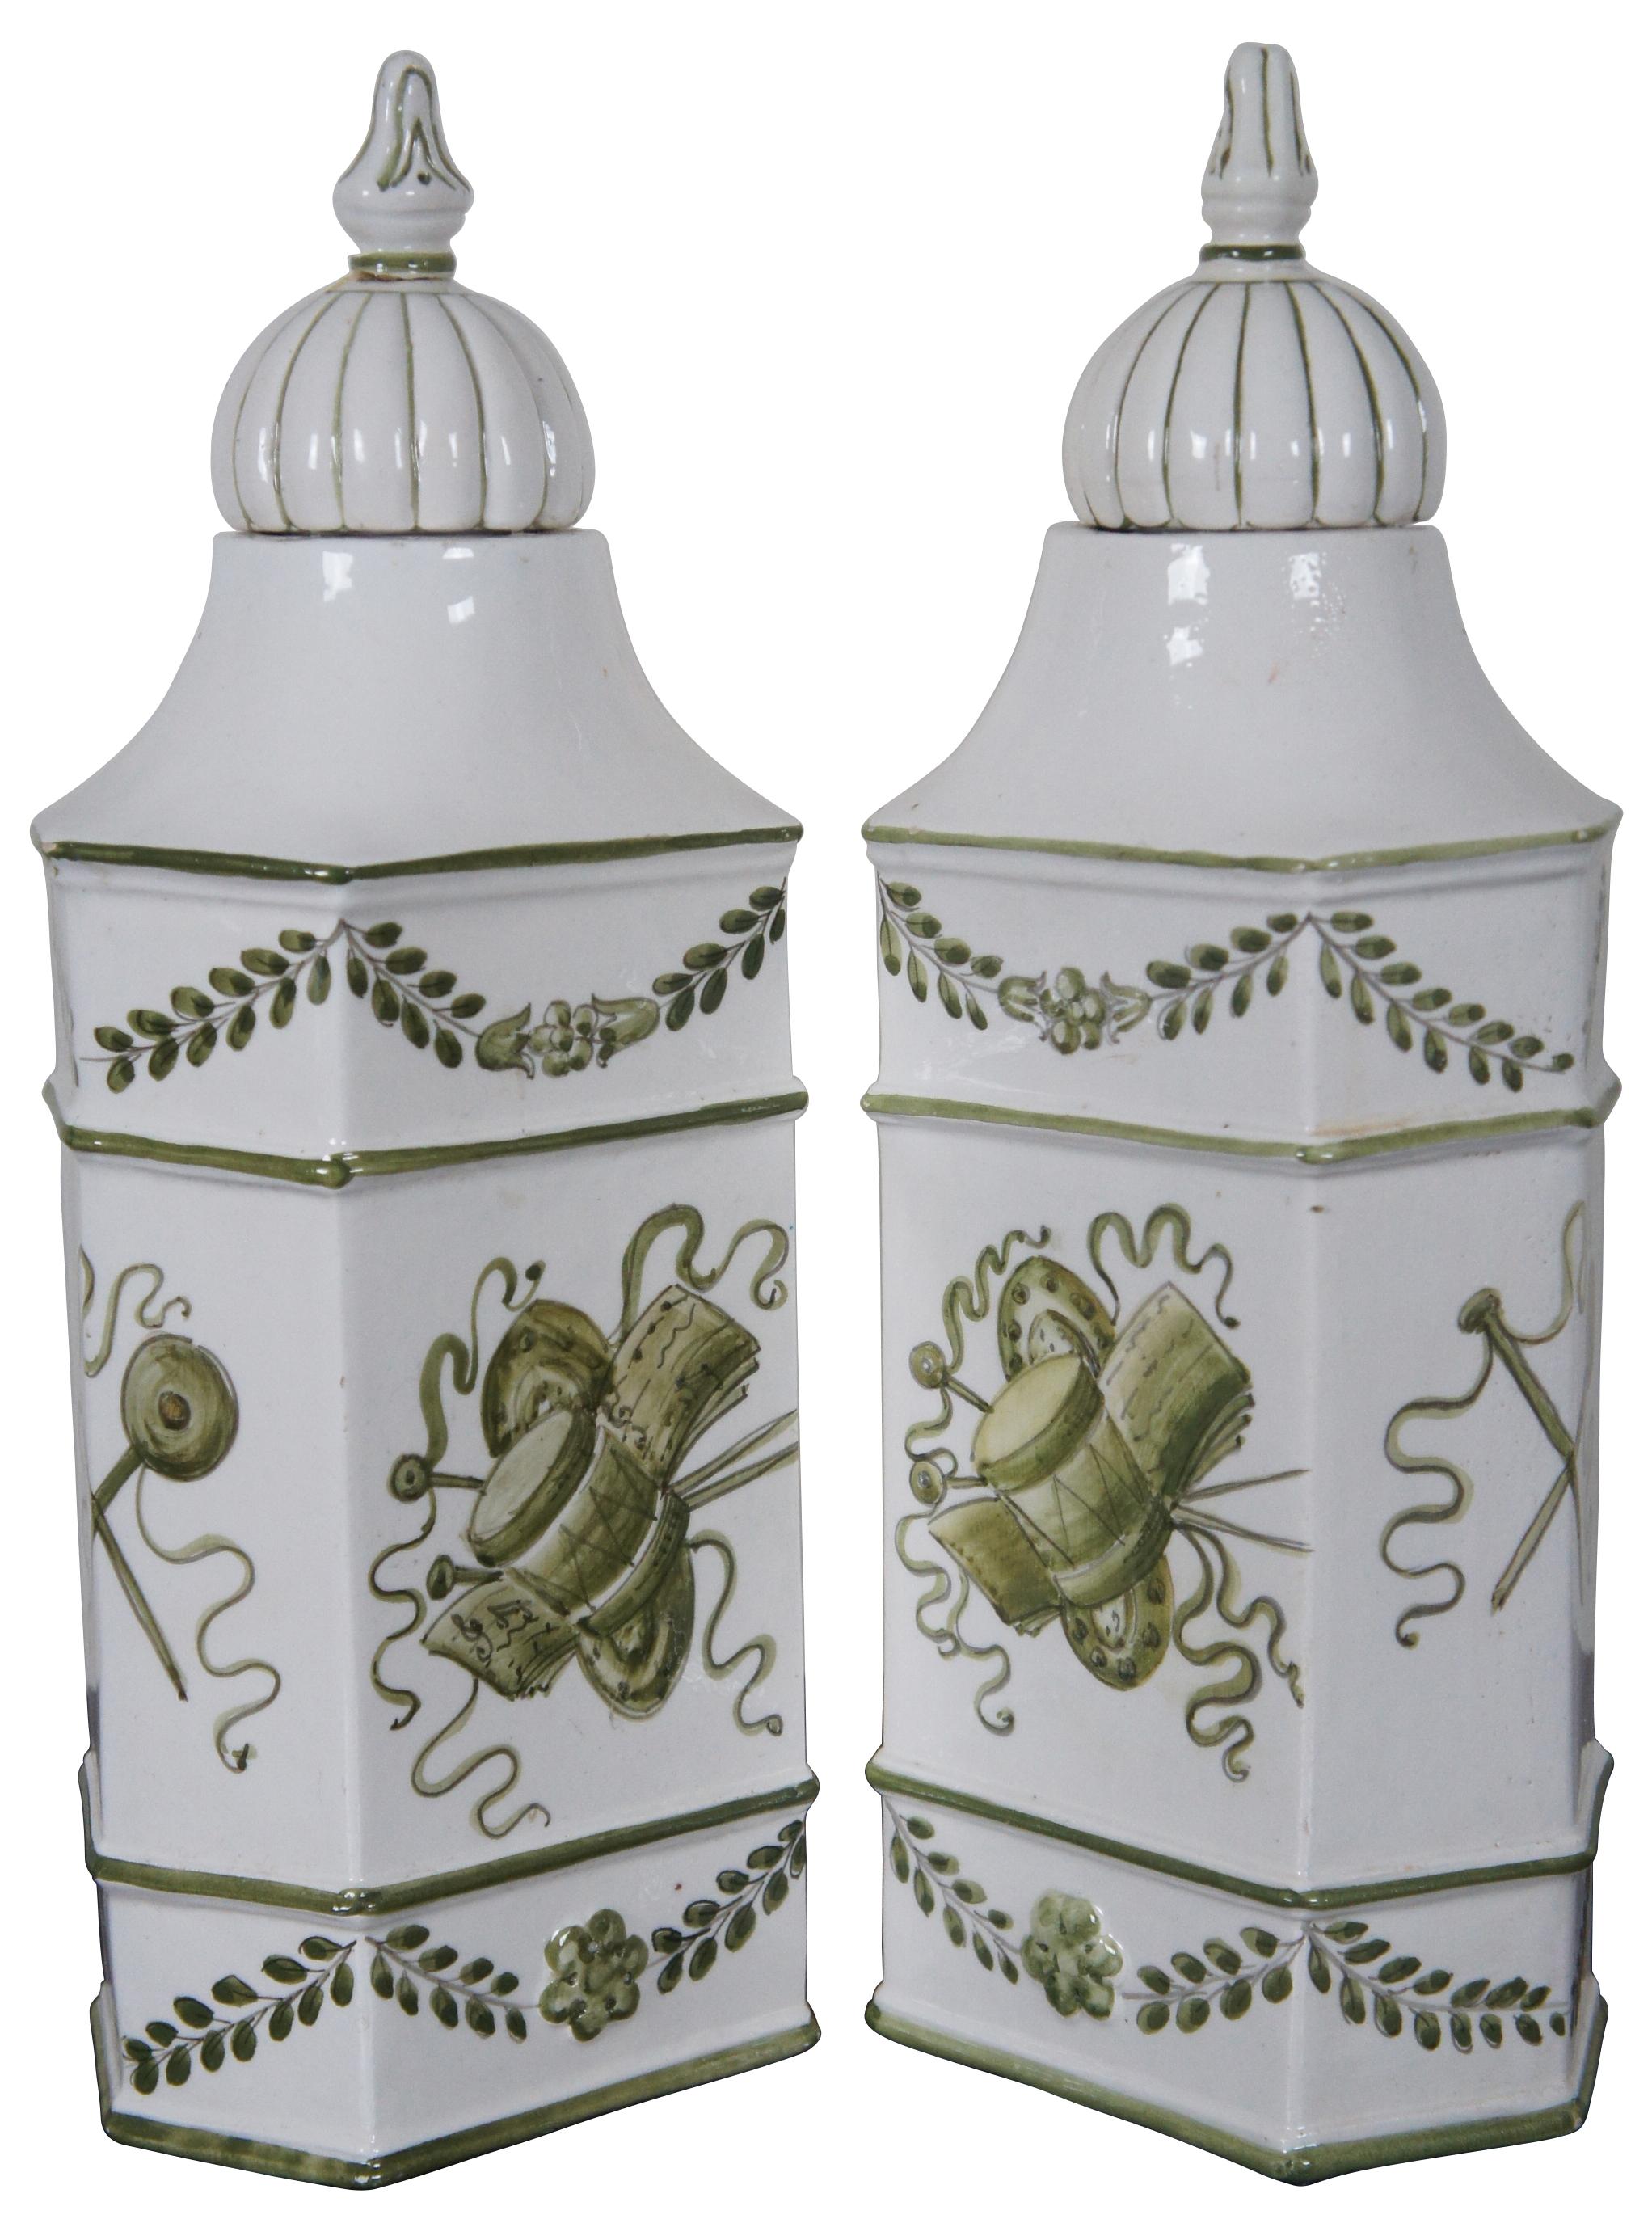 Pair of vintage Italian porcelain hand painted lidded vases with green floral and musical instrument motifs. Measure: 15